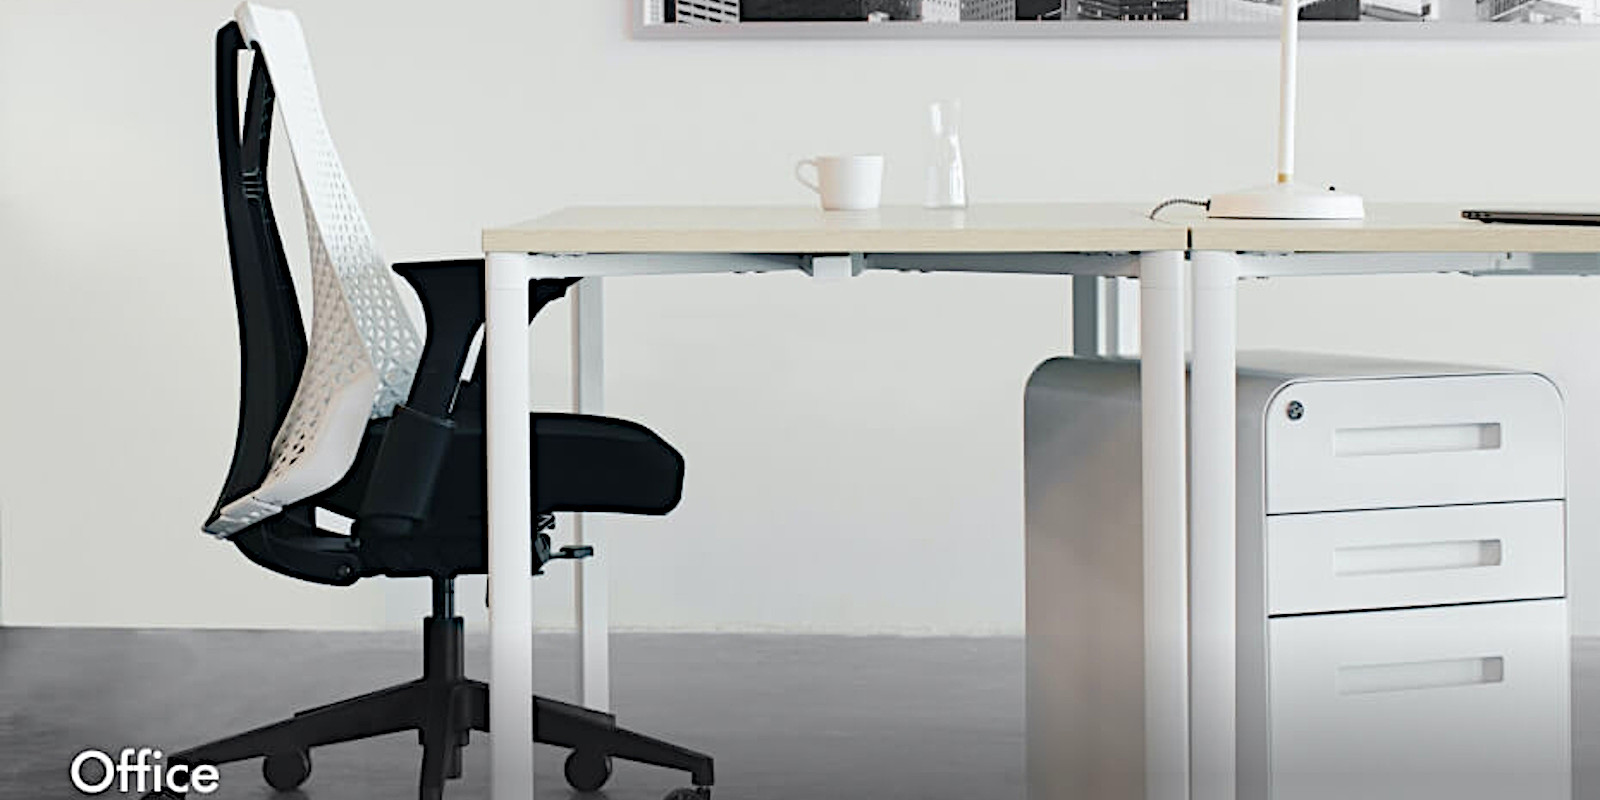 Office furniture popularly priced